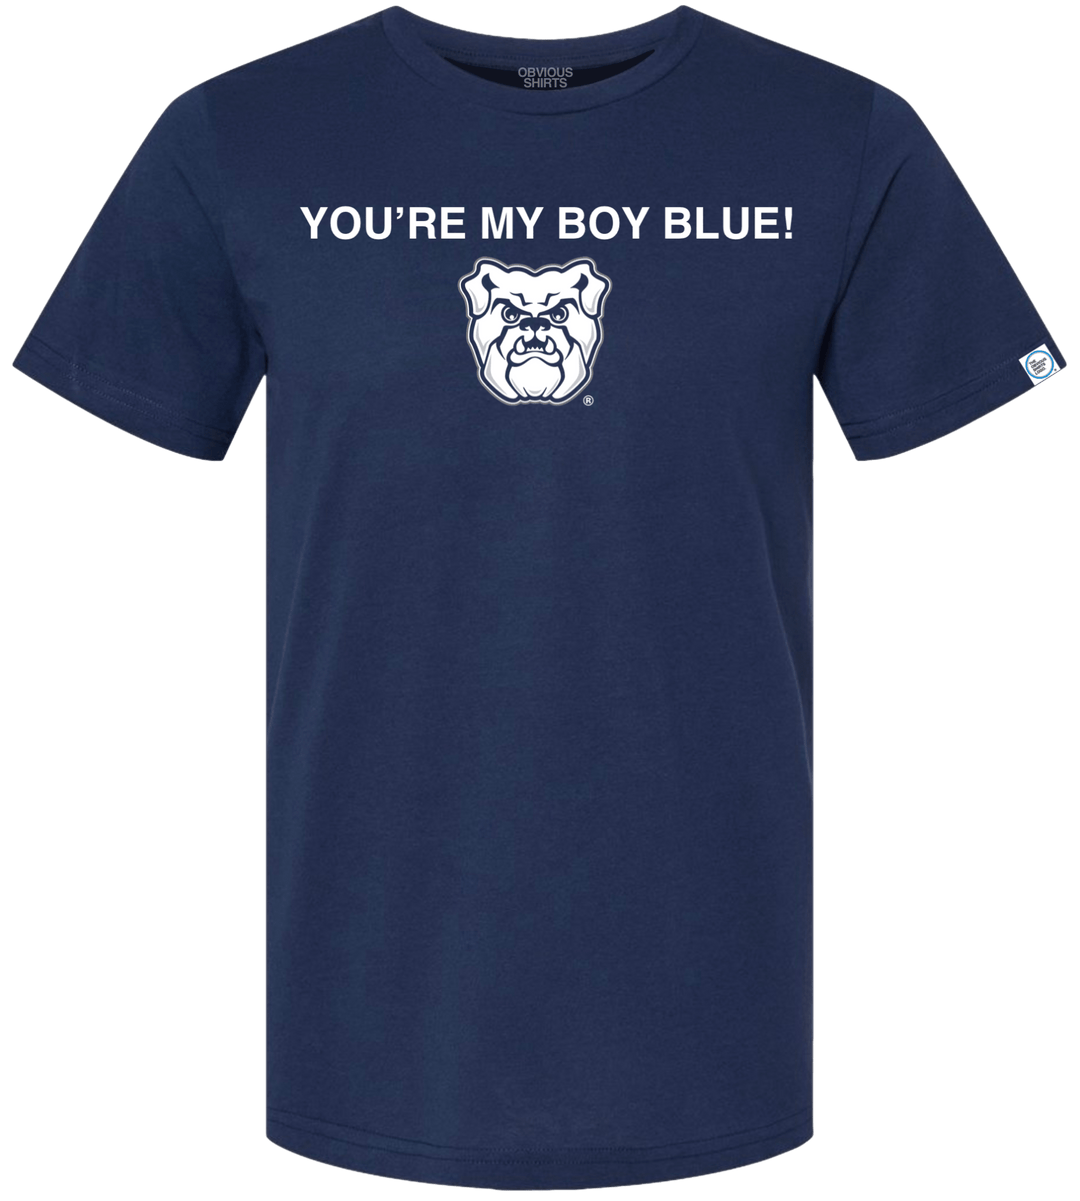 YOU'RE MY BOY BLUE! - OBVIOUS SHIRTS